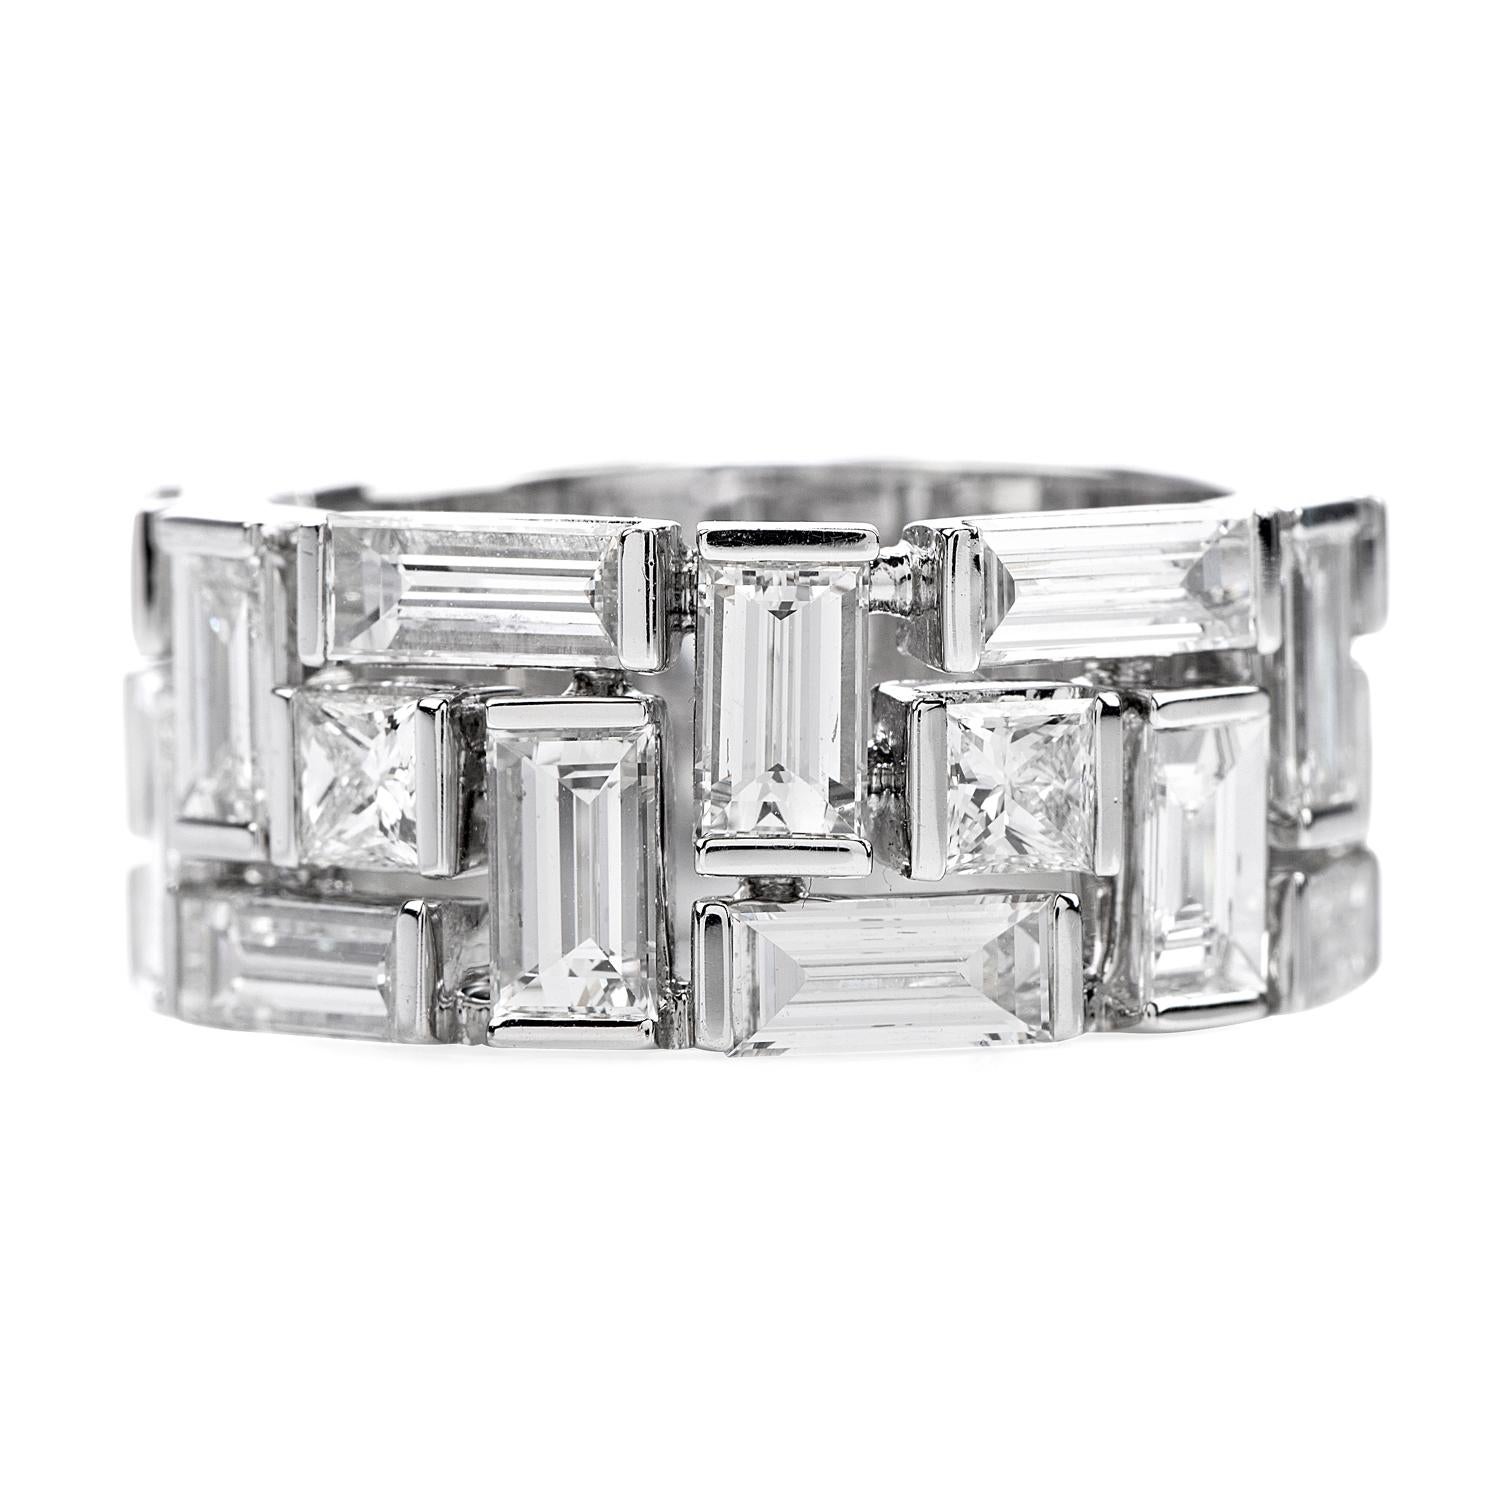 This hand crafted 18k white gold baguette and princess cut diamonds channel set on the rims of

This  abstract design ring feature 16 large Baguette cut diamond weighing approx. 5.20 caratsF-G color, VS1 clarity and 4 square princess cut natural